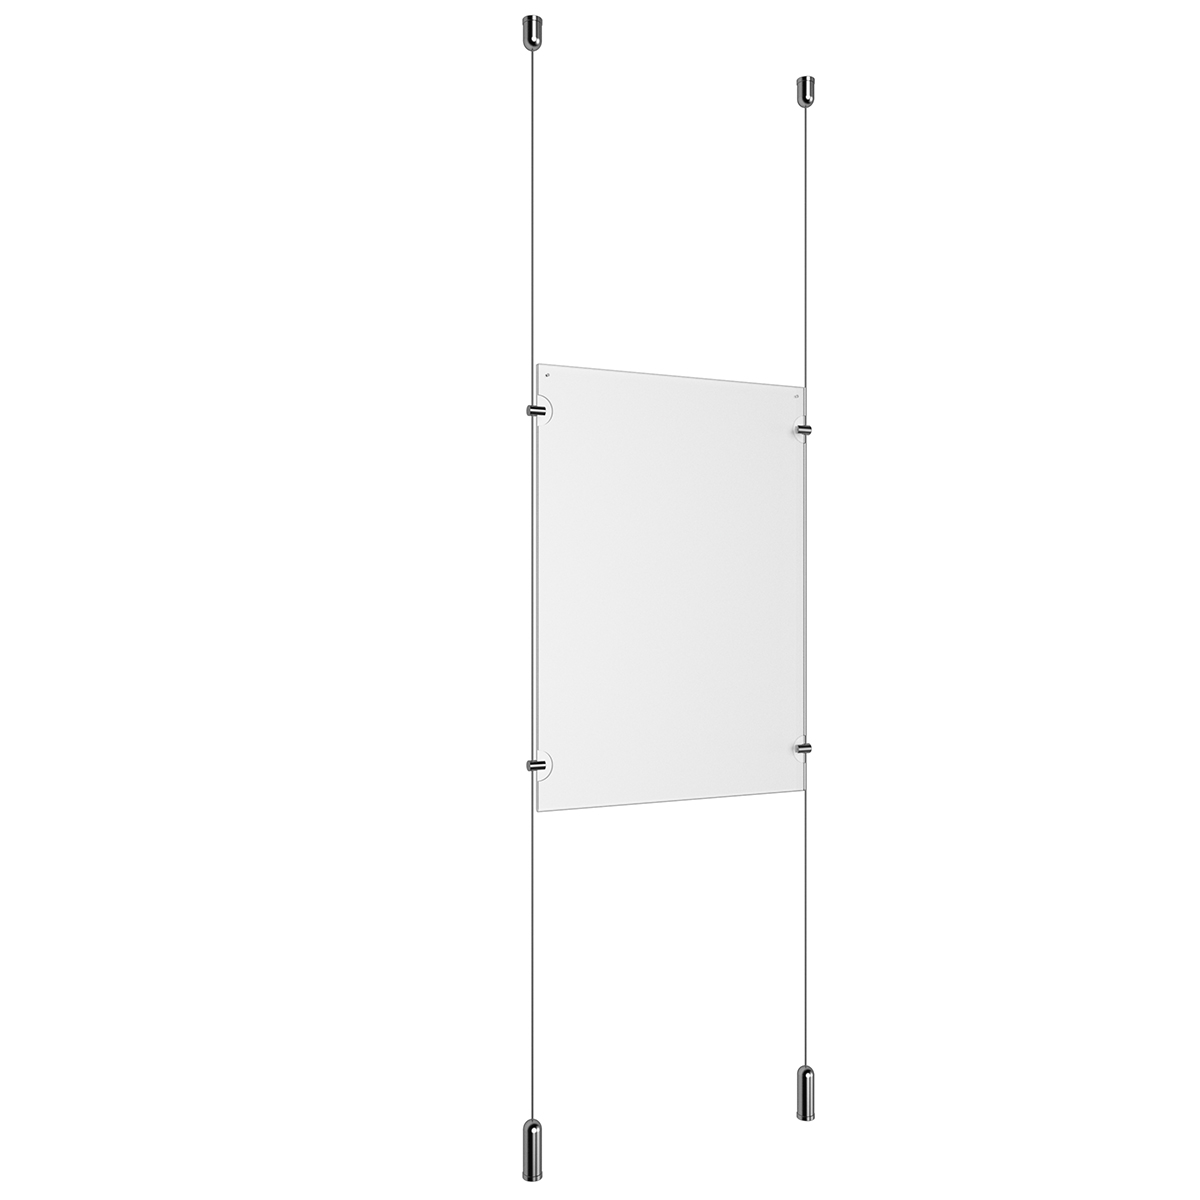 (1) 11'' Width x 17'' Height Clear Acrylic Frame & (2) Ceiling-to-Floor Aluminum Clear Anodized Cable Systems with (4) Single-Sided Panel Grippers